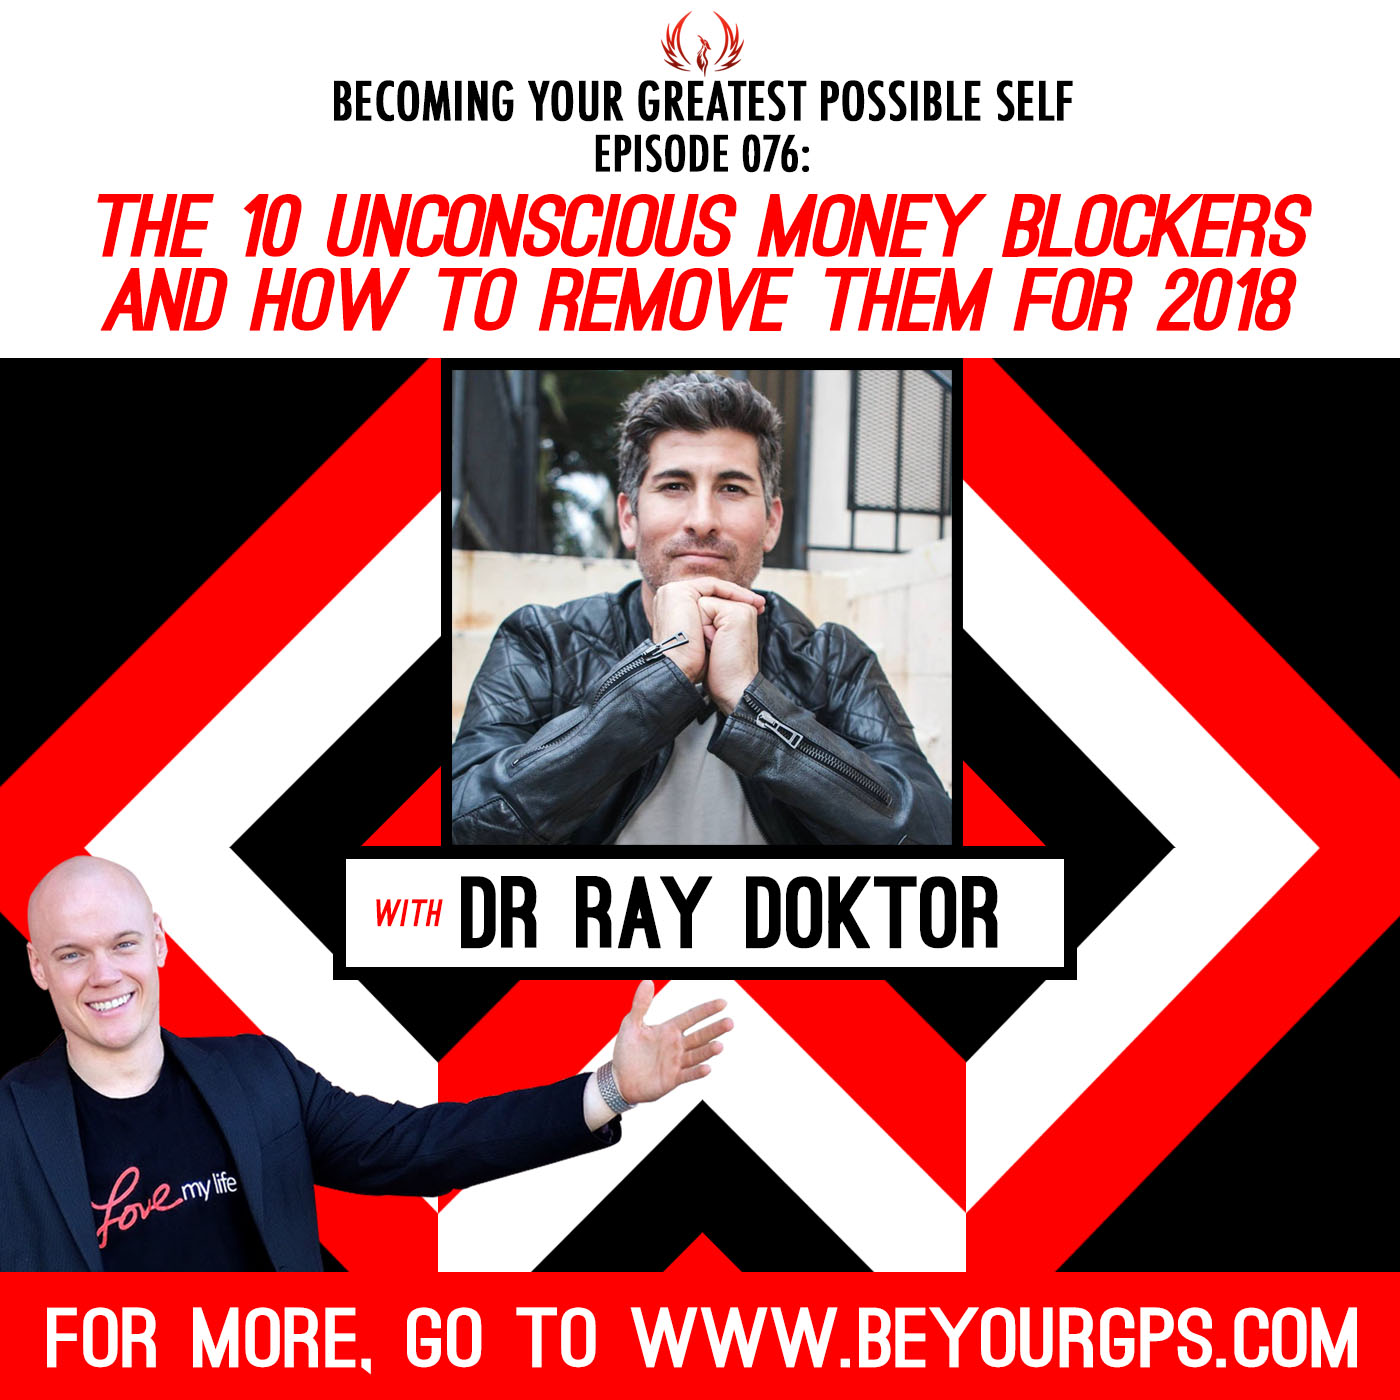 The 10 Unconscious Money Blockers and How to Remove them for 2018 with Dr. Ray Doktor